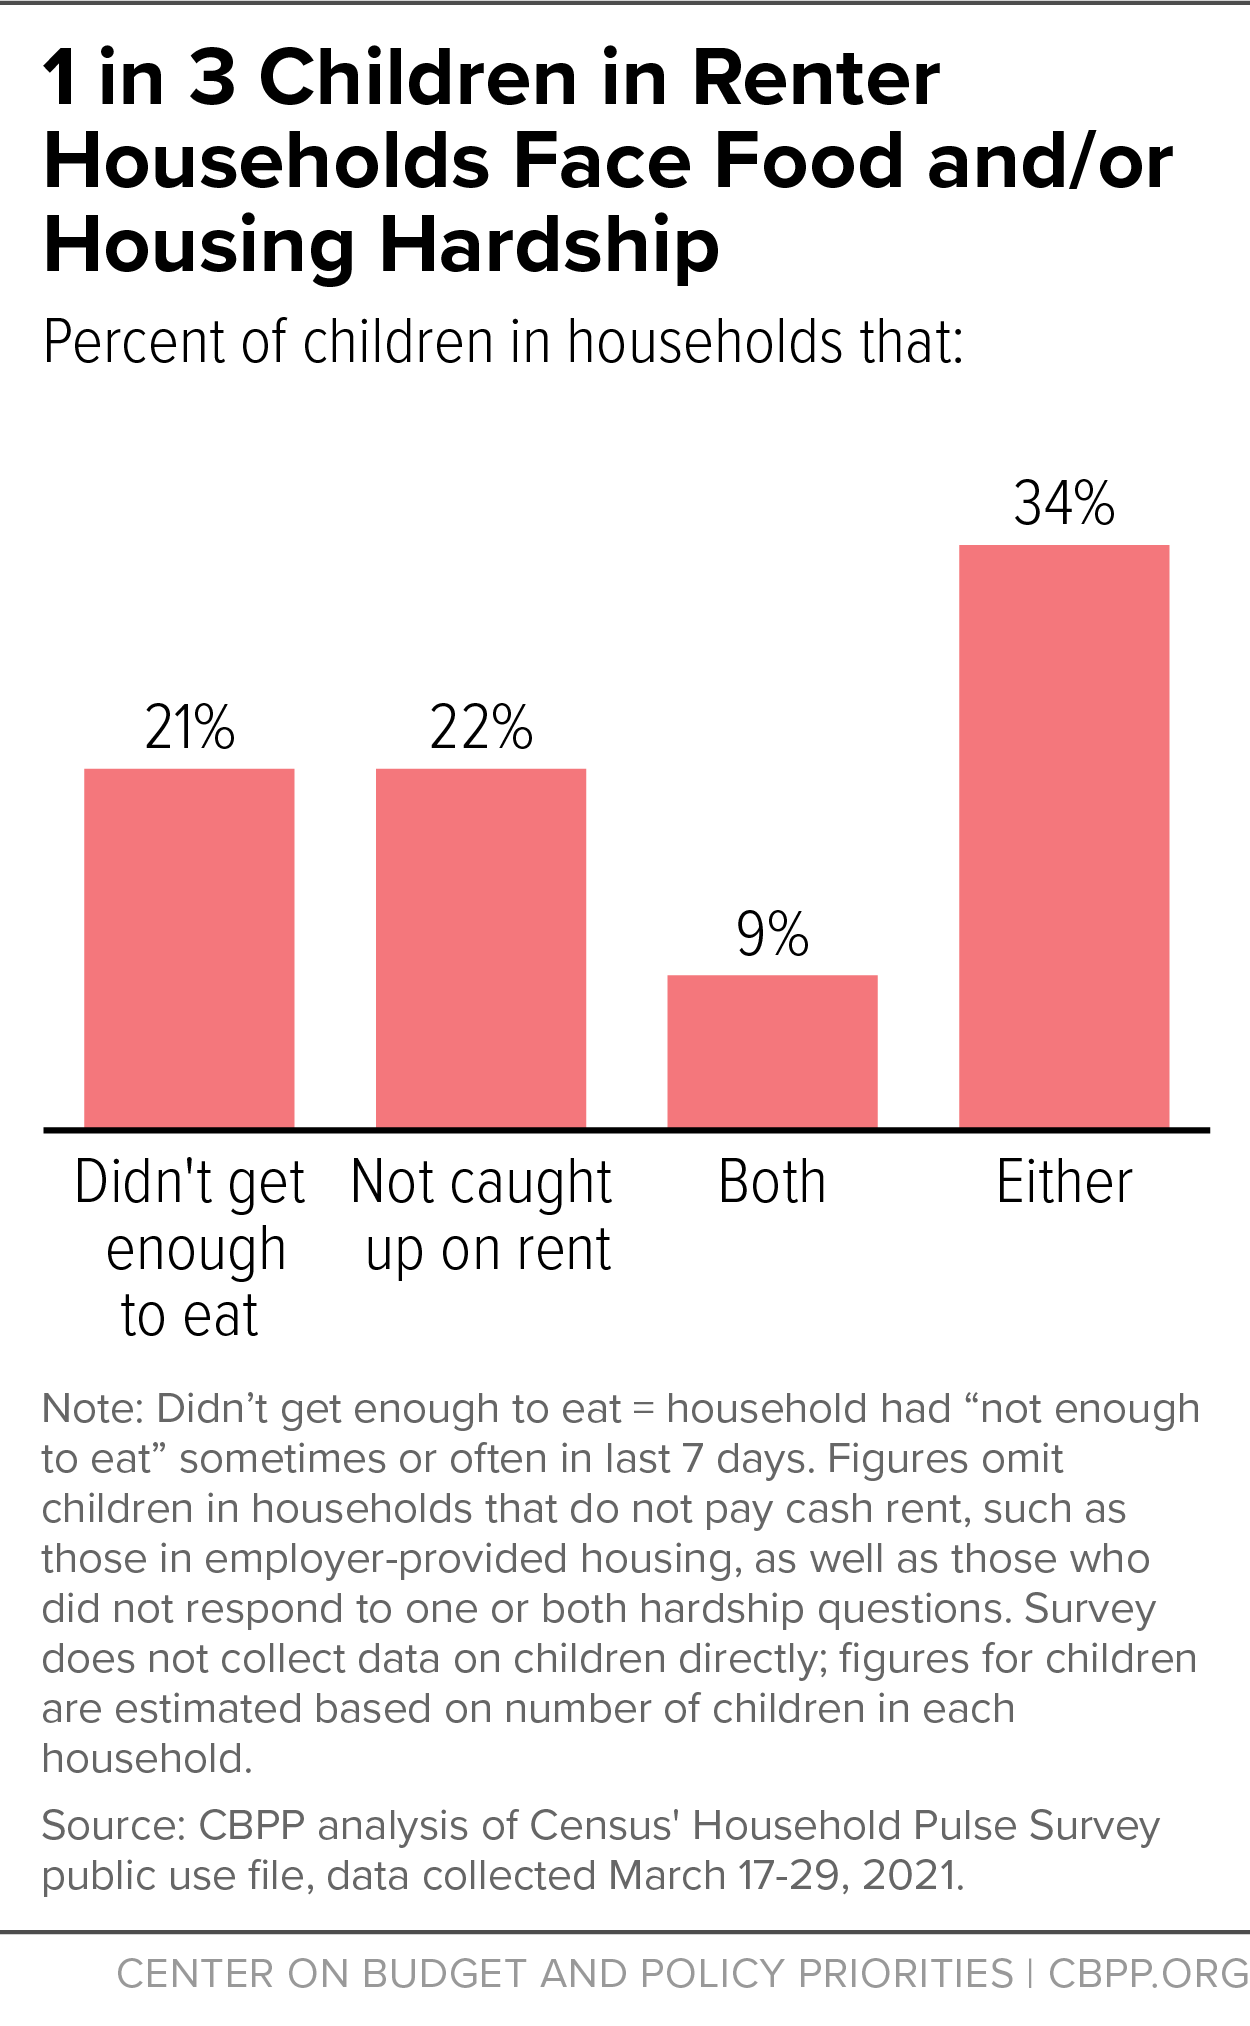 1 in 3 Children in Renter Households Face Food and/or Housing Hardship